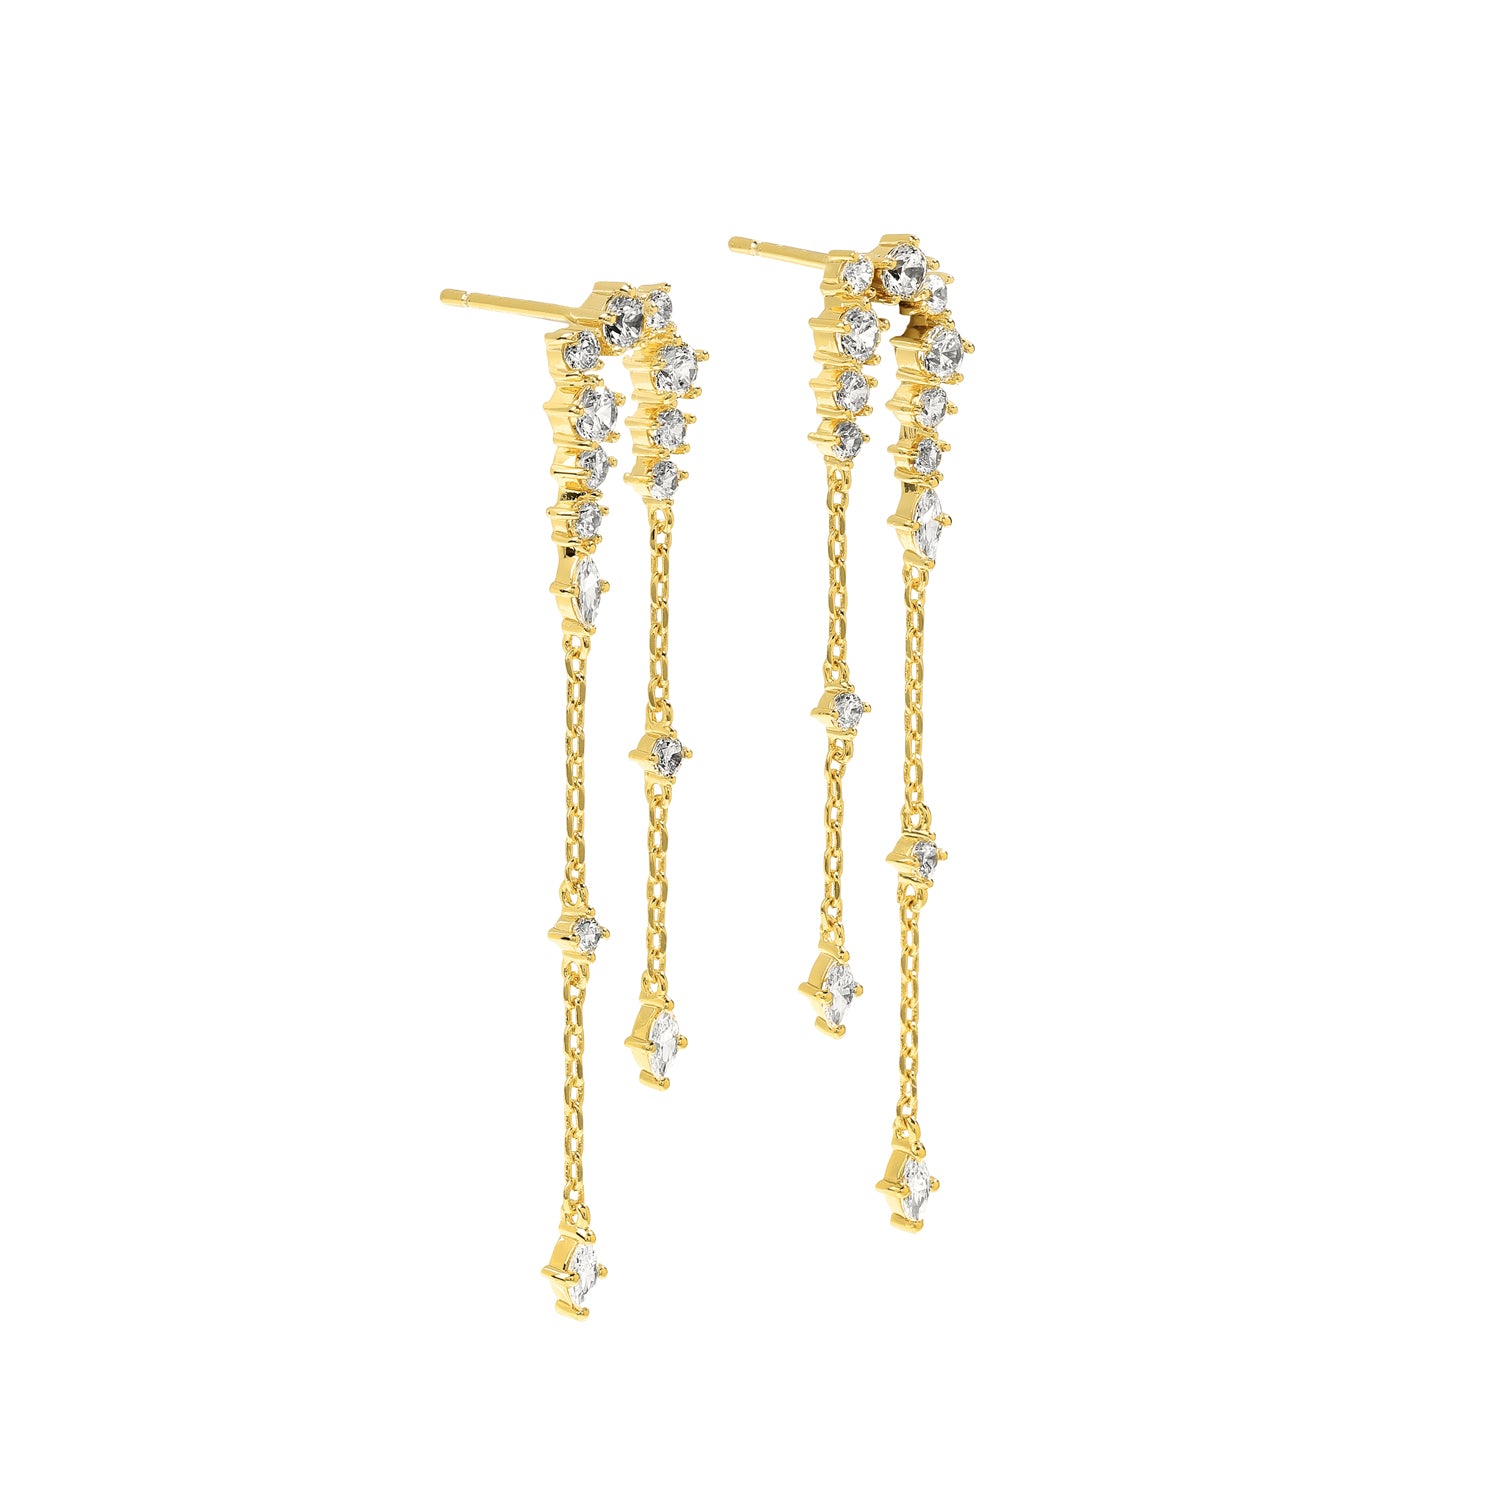 Elegant and statement earrings. Gold drop earrings set with cubic zirconia stones.